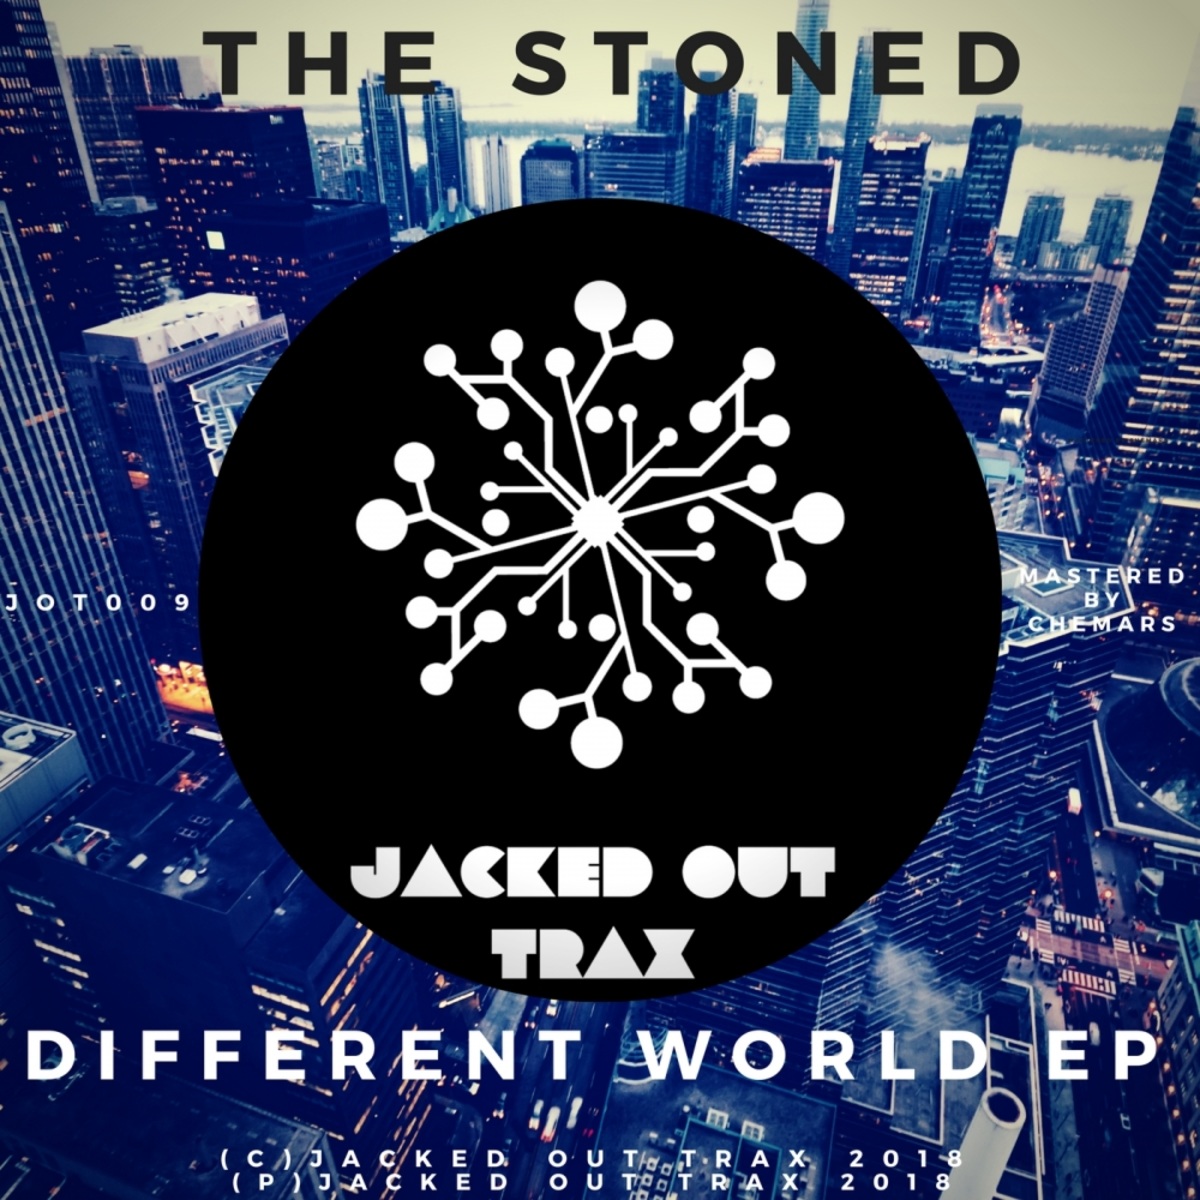 The Stoned - Different World EP / Jacked Out Trax